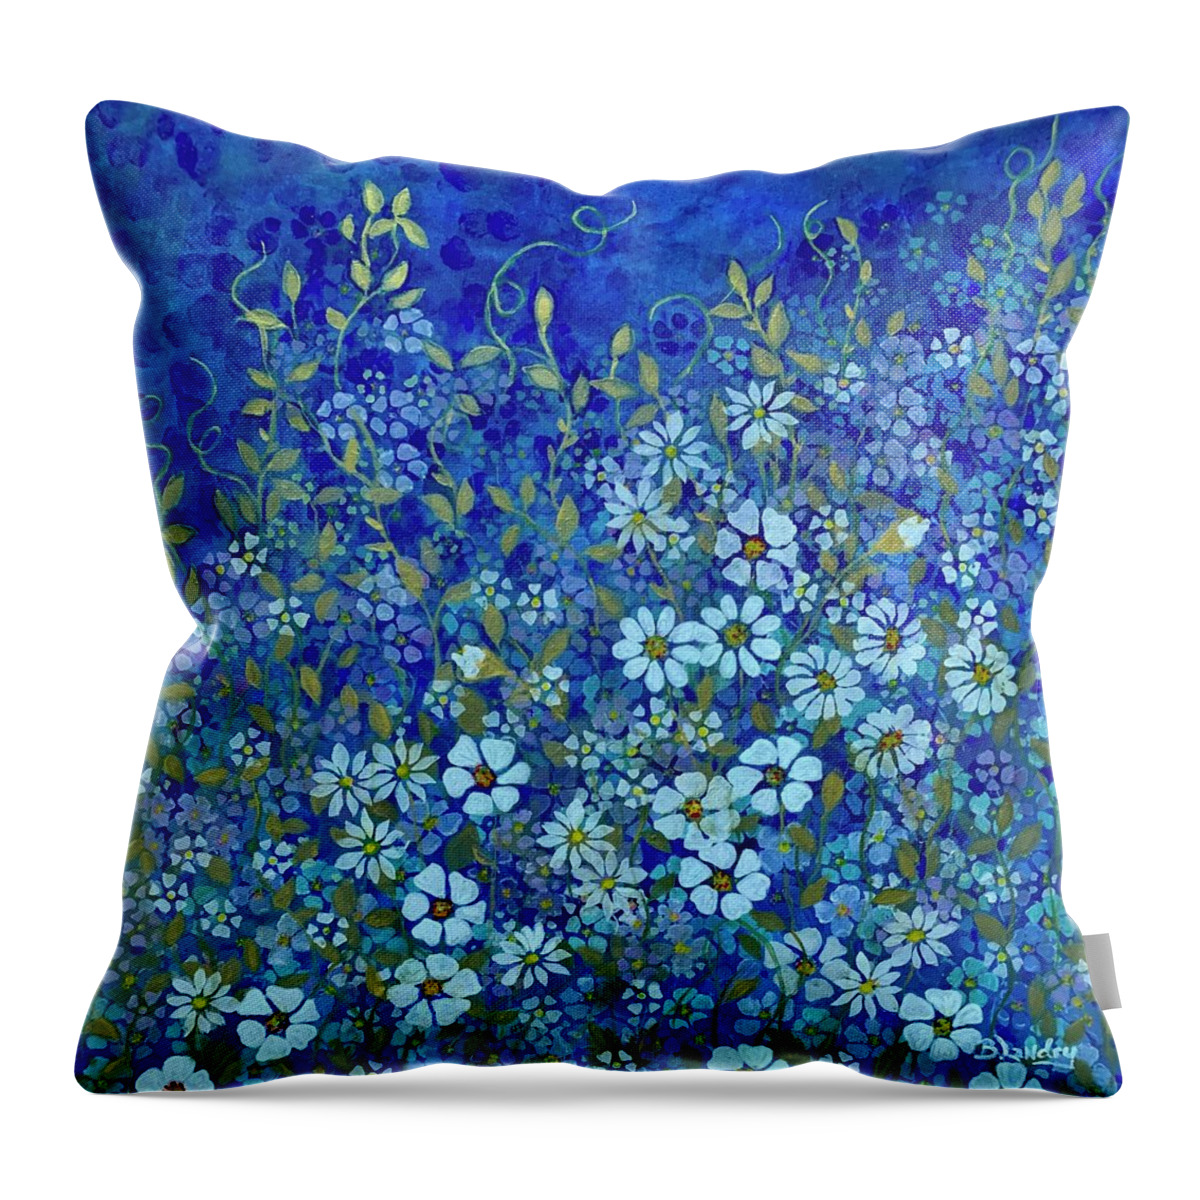 Stencil Throw Pillow featuring the painting Stencil Me Blue by Barbara Landry